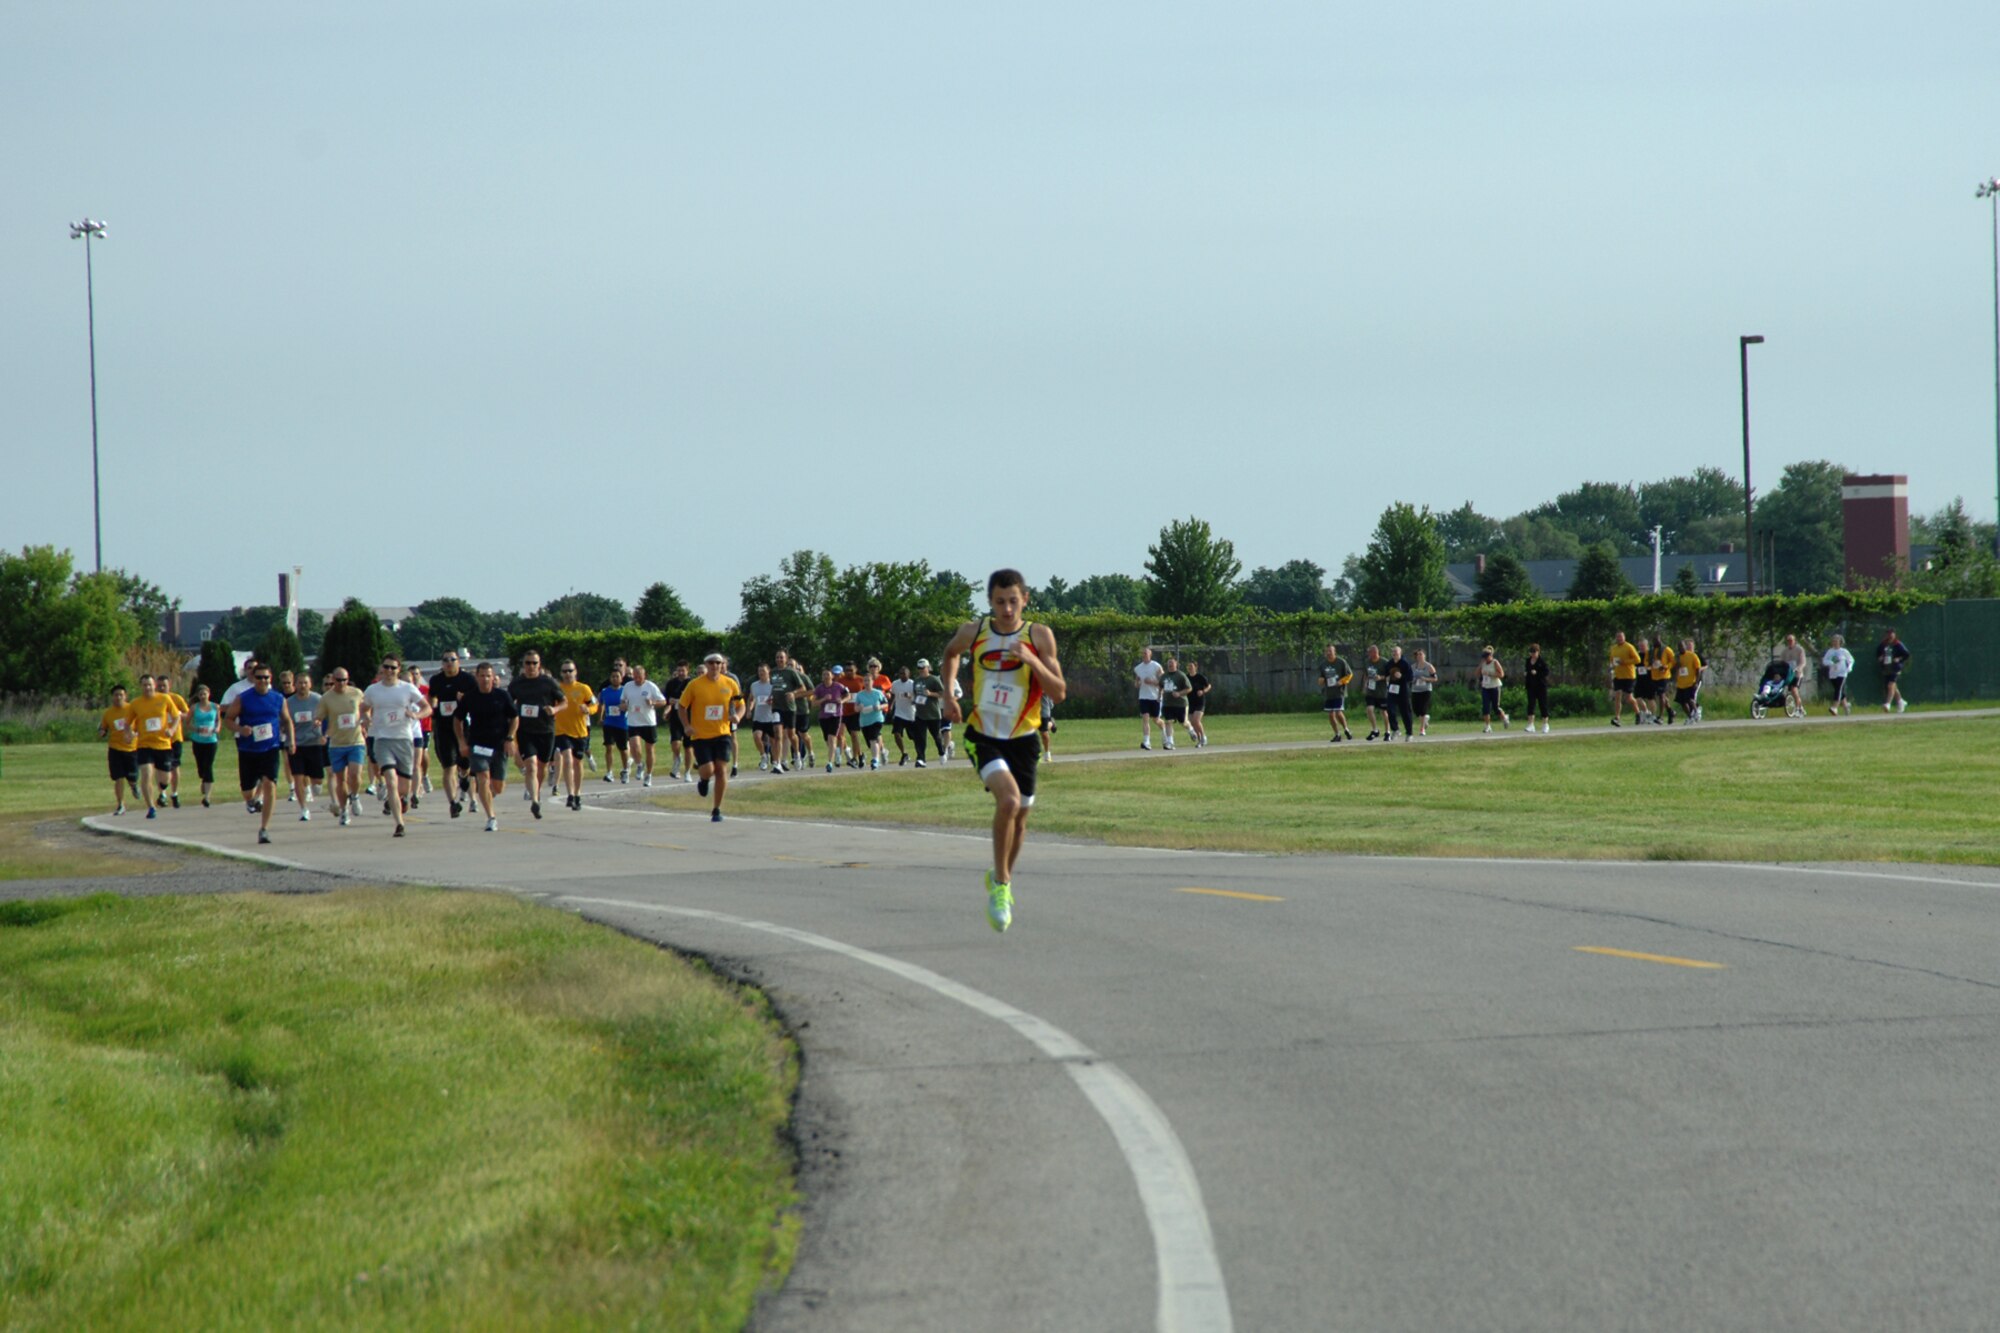 On June 10, 2011, the Robotic Systems Joint Project Office at Selfridge Air National Guard Base held their third annual Robot Trot.  Over 100 runners competed in the 5K race.  Several other runners also competed in a 10-mile race to qualify for the Army 10-Miler, which will be held in Washington D.C. later this year.  Proceeds from the event went to benefit the Wounded Warrior Project.   (U.S. Air Force Photo by Rachel Barton, 127th Public Affairs)